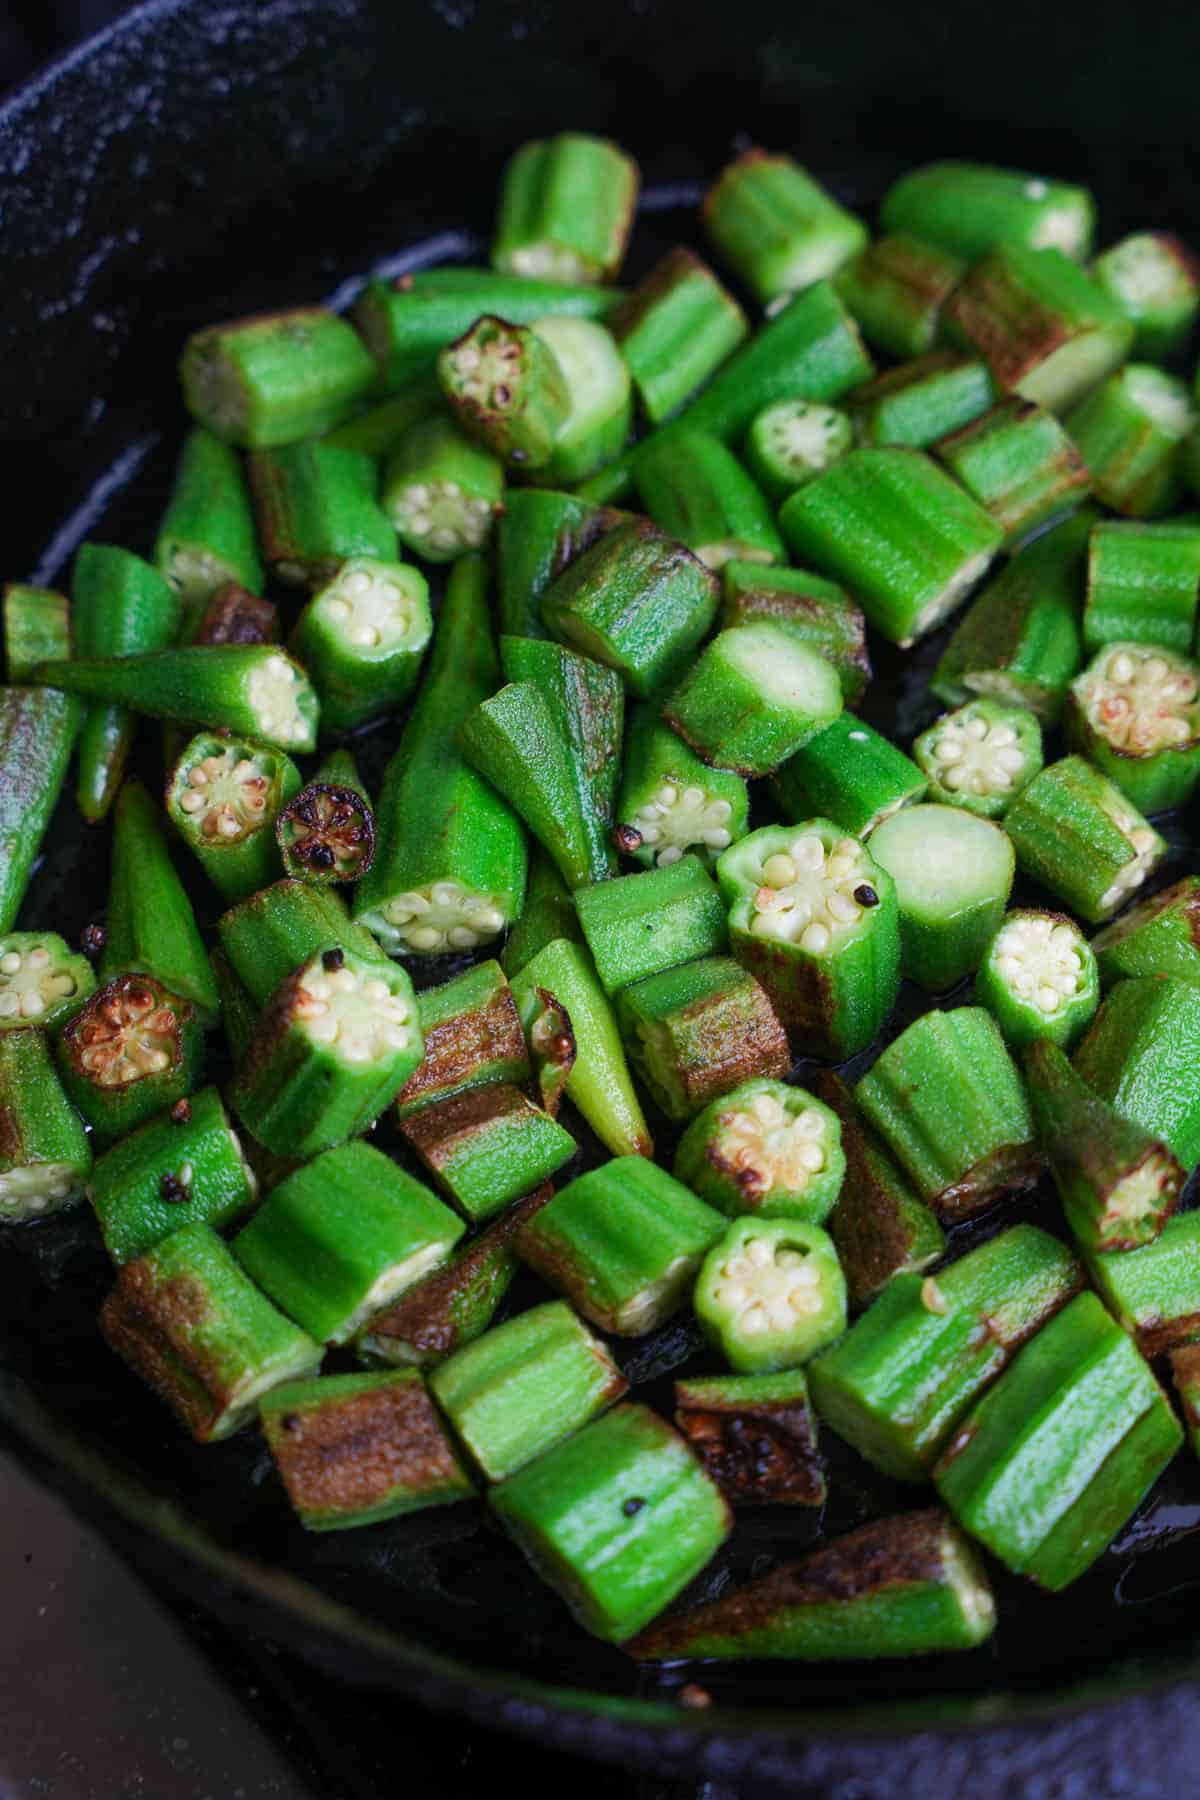 Vibrant green okra is pan fried in a cast iron skillet.